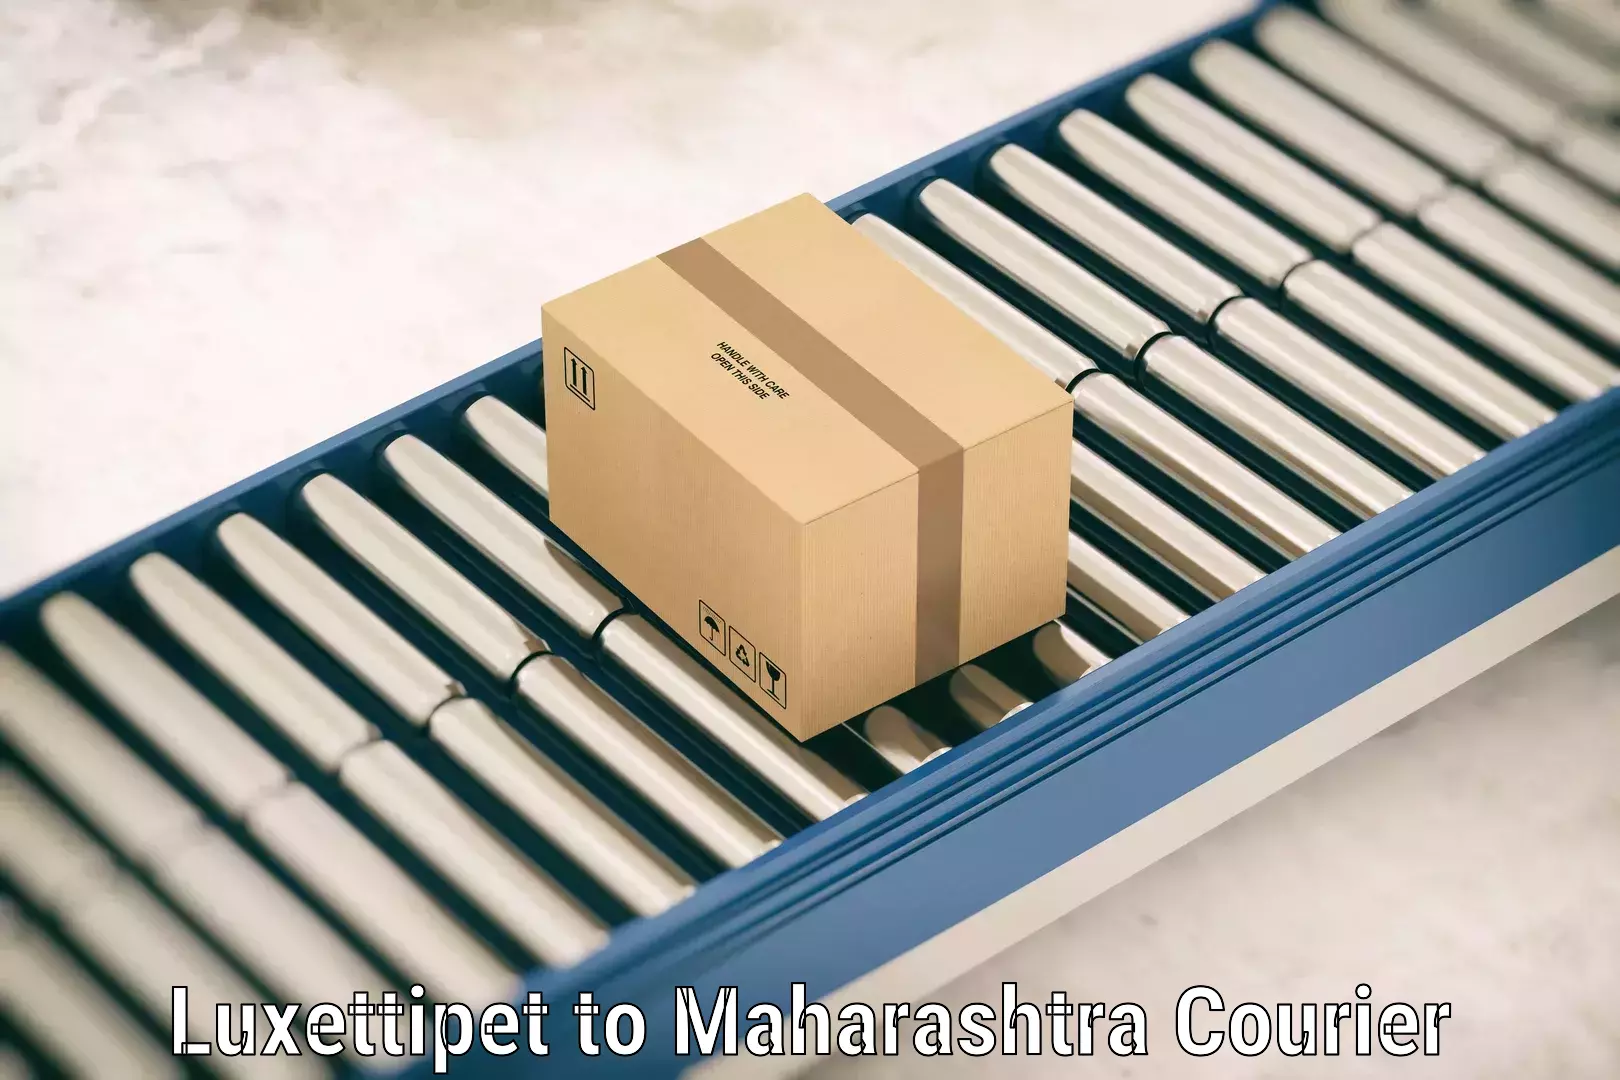 Baggage transport innovation Luxettipet to Maharashtra